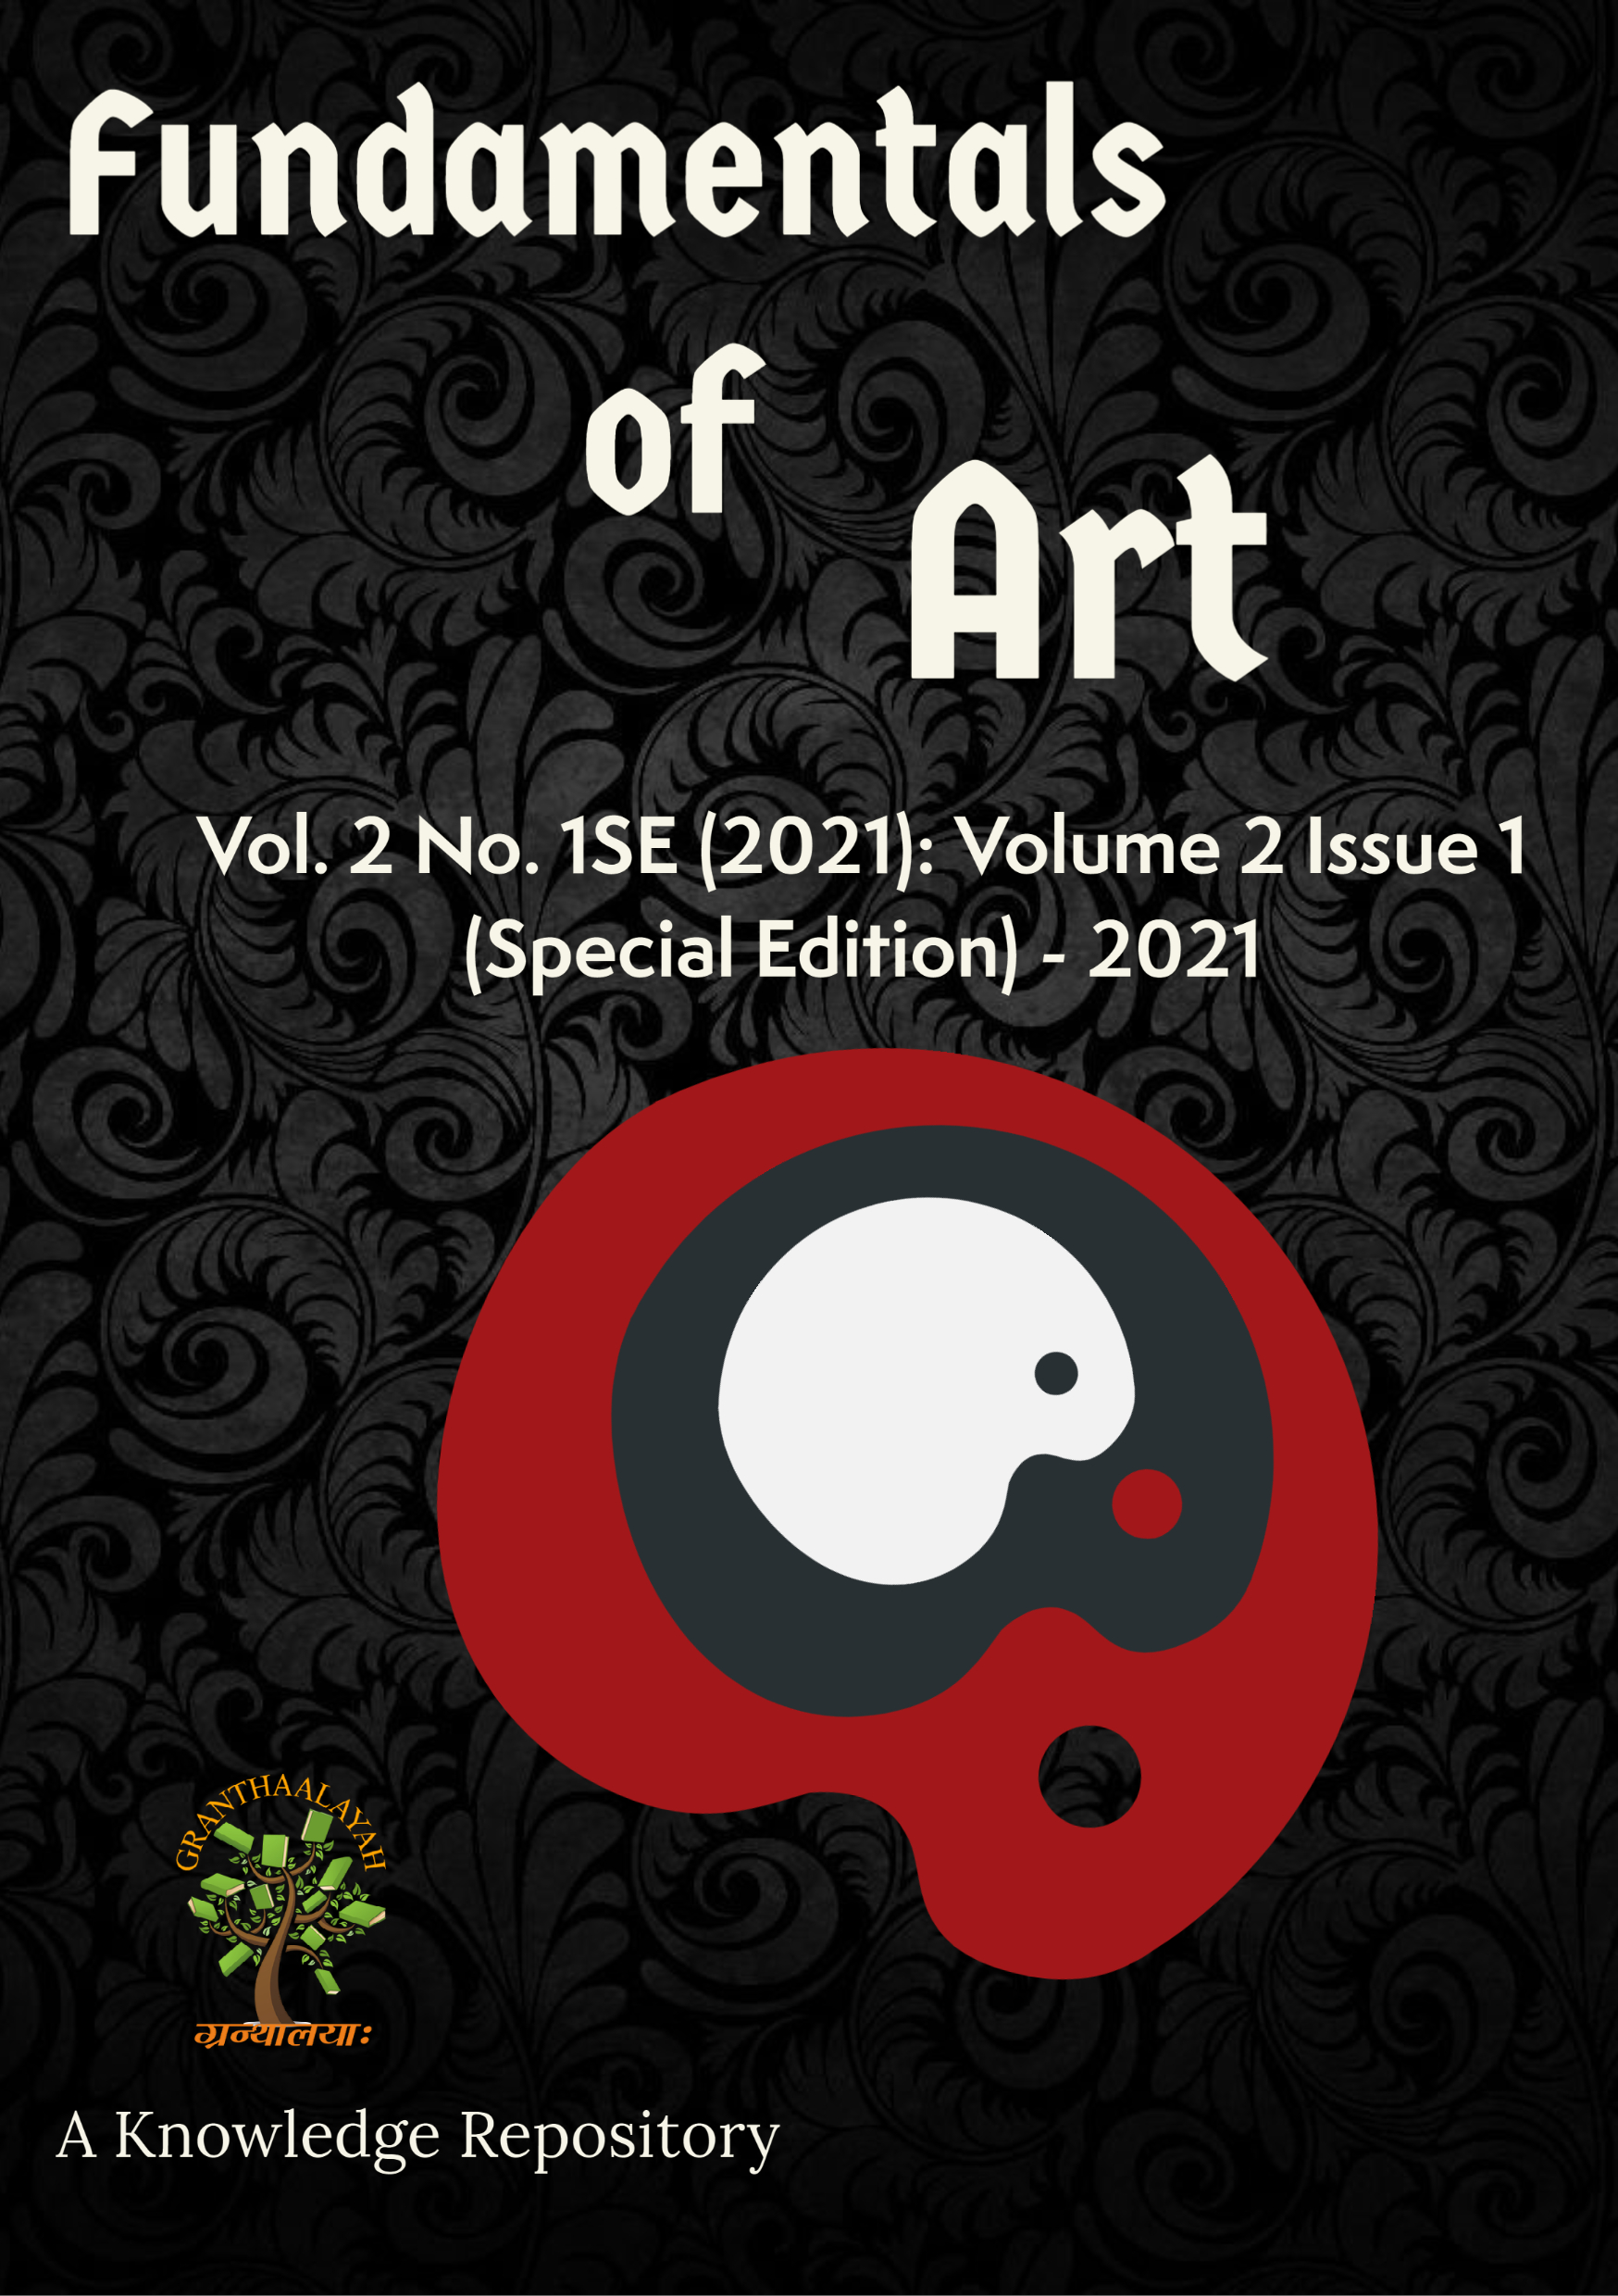 					View Vol. 2 No. 1SE (2021): Volume 2 Issue 1 (Special Edition) - 2021
				